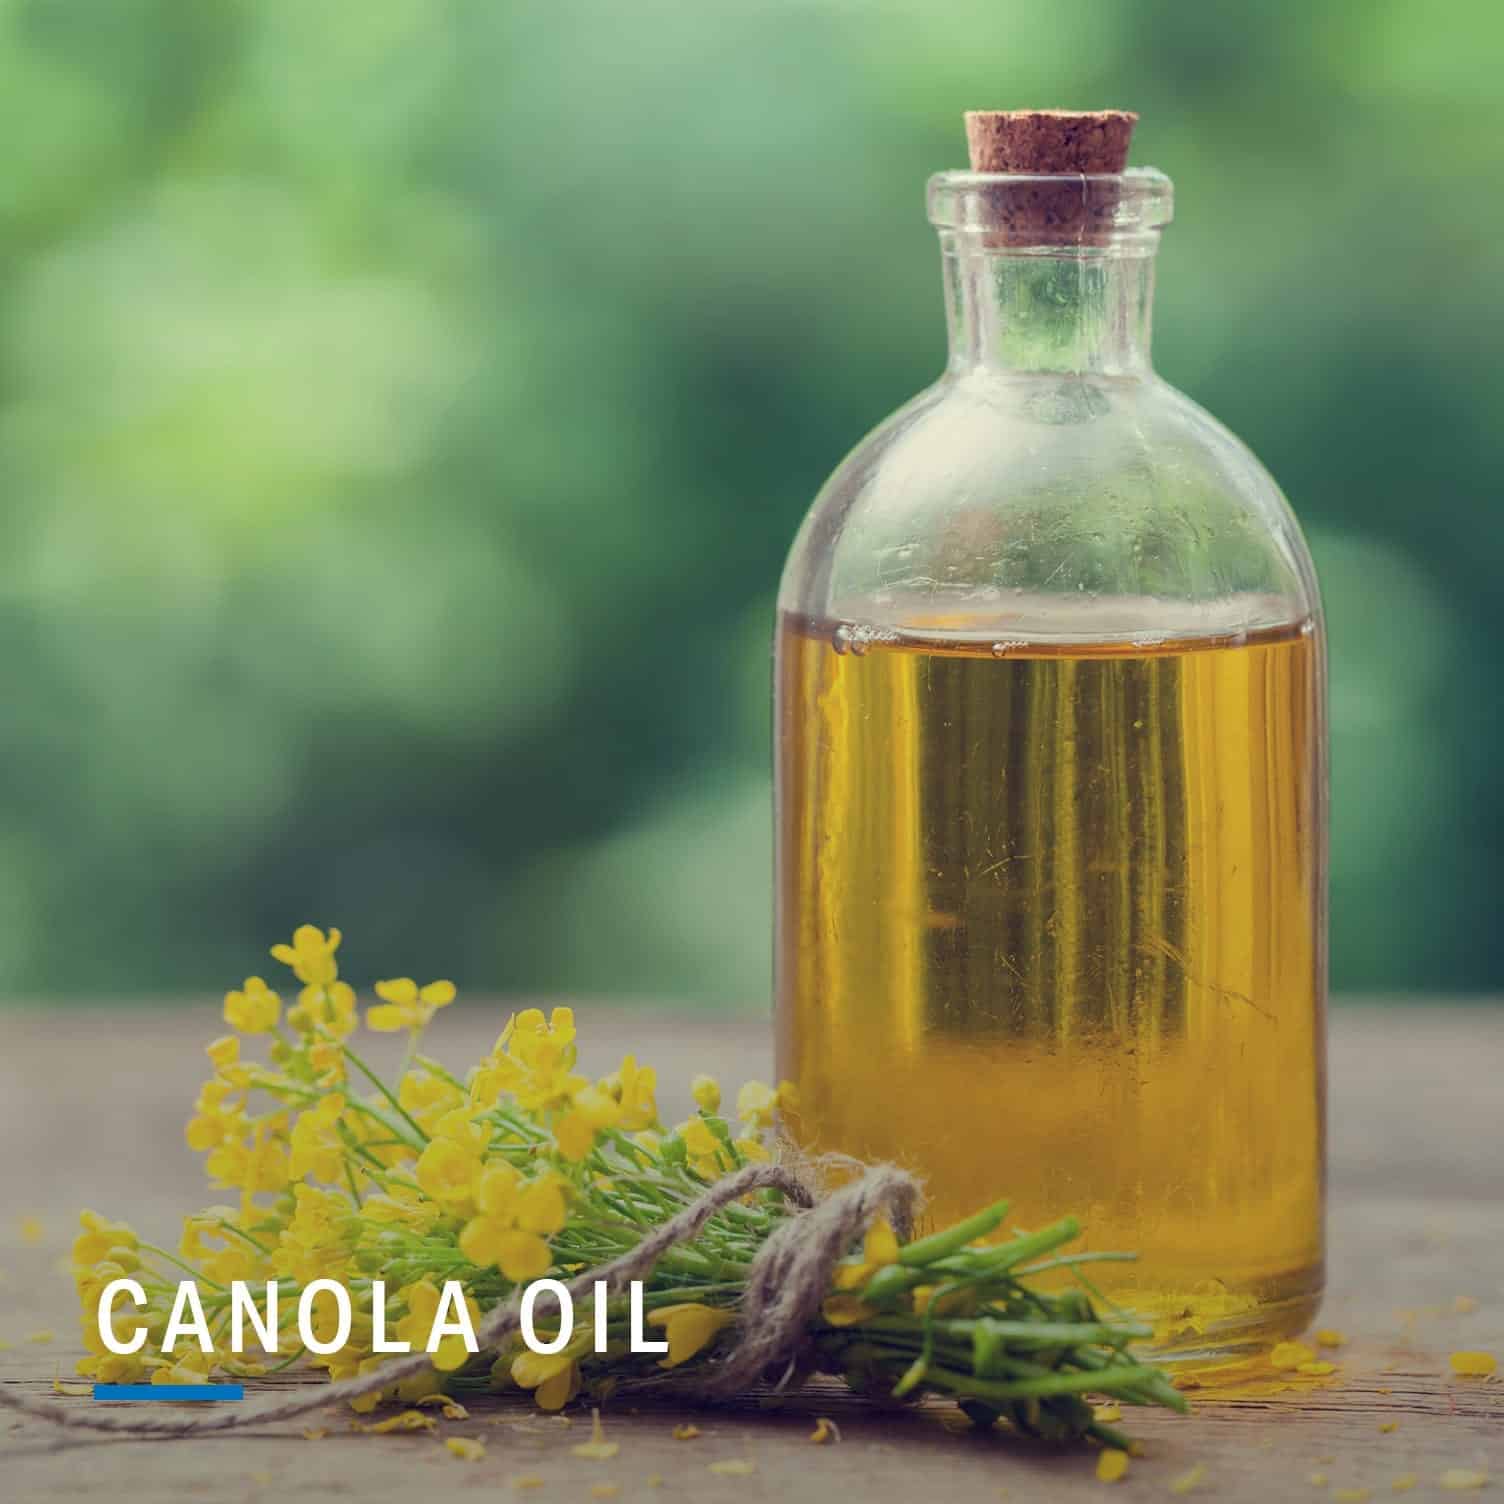 Ask the RD: What’s the Healthiest Cooking Oil?